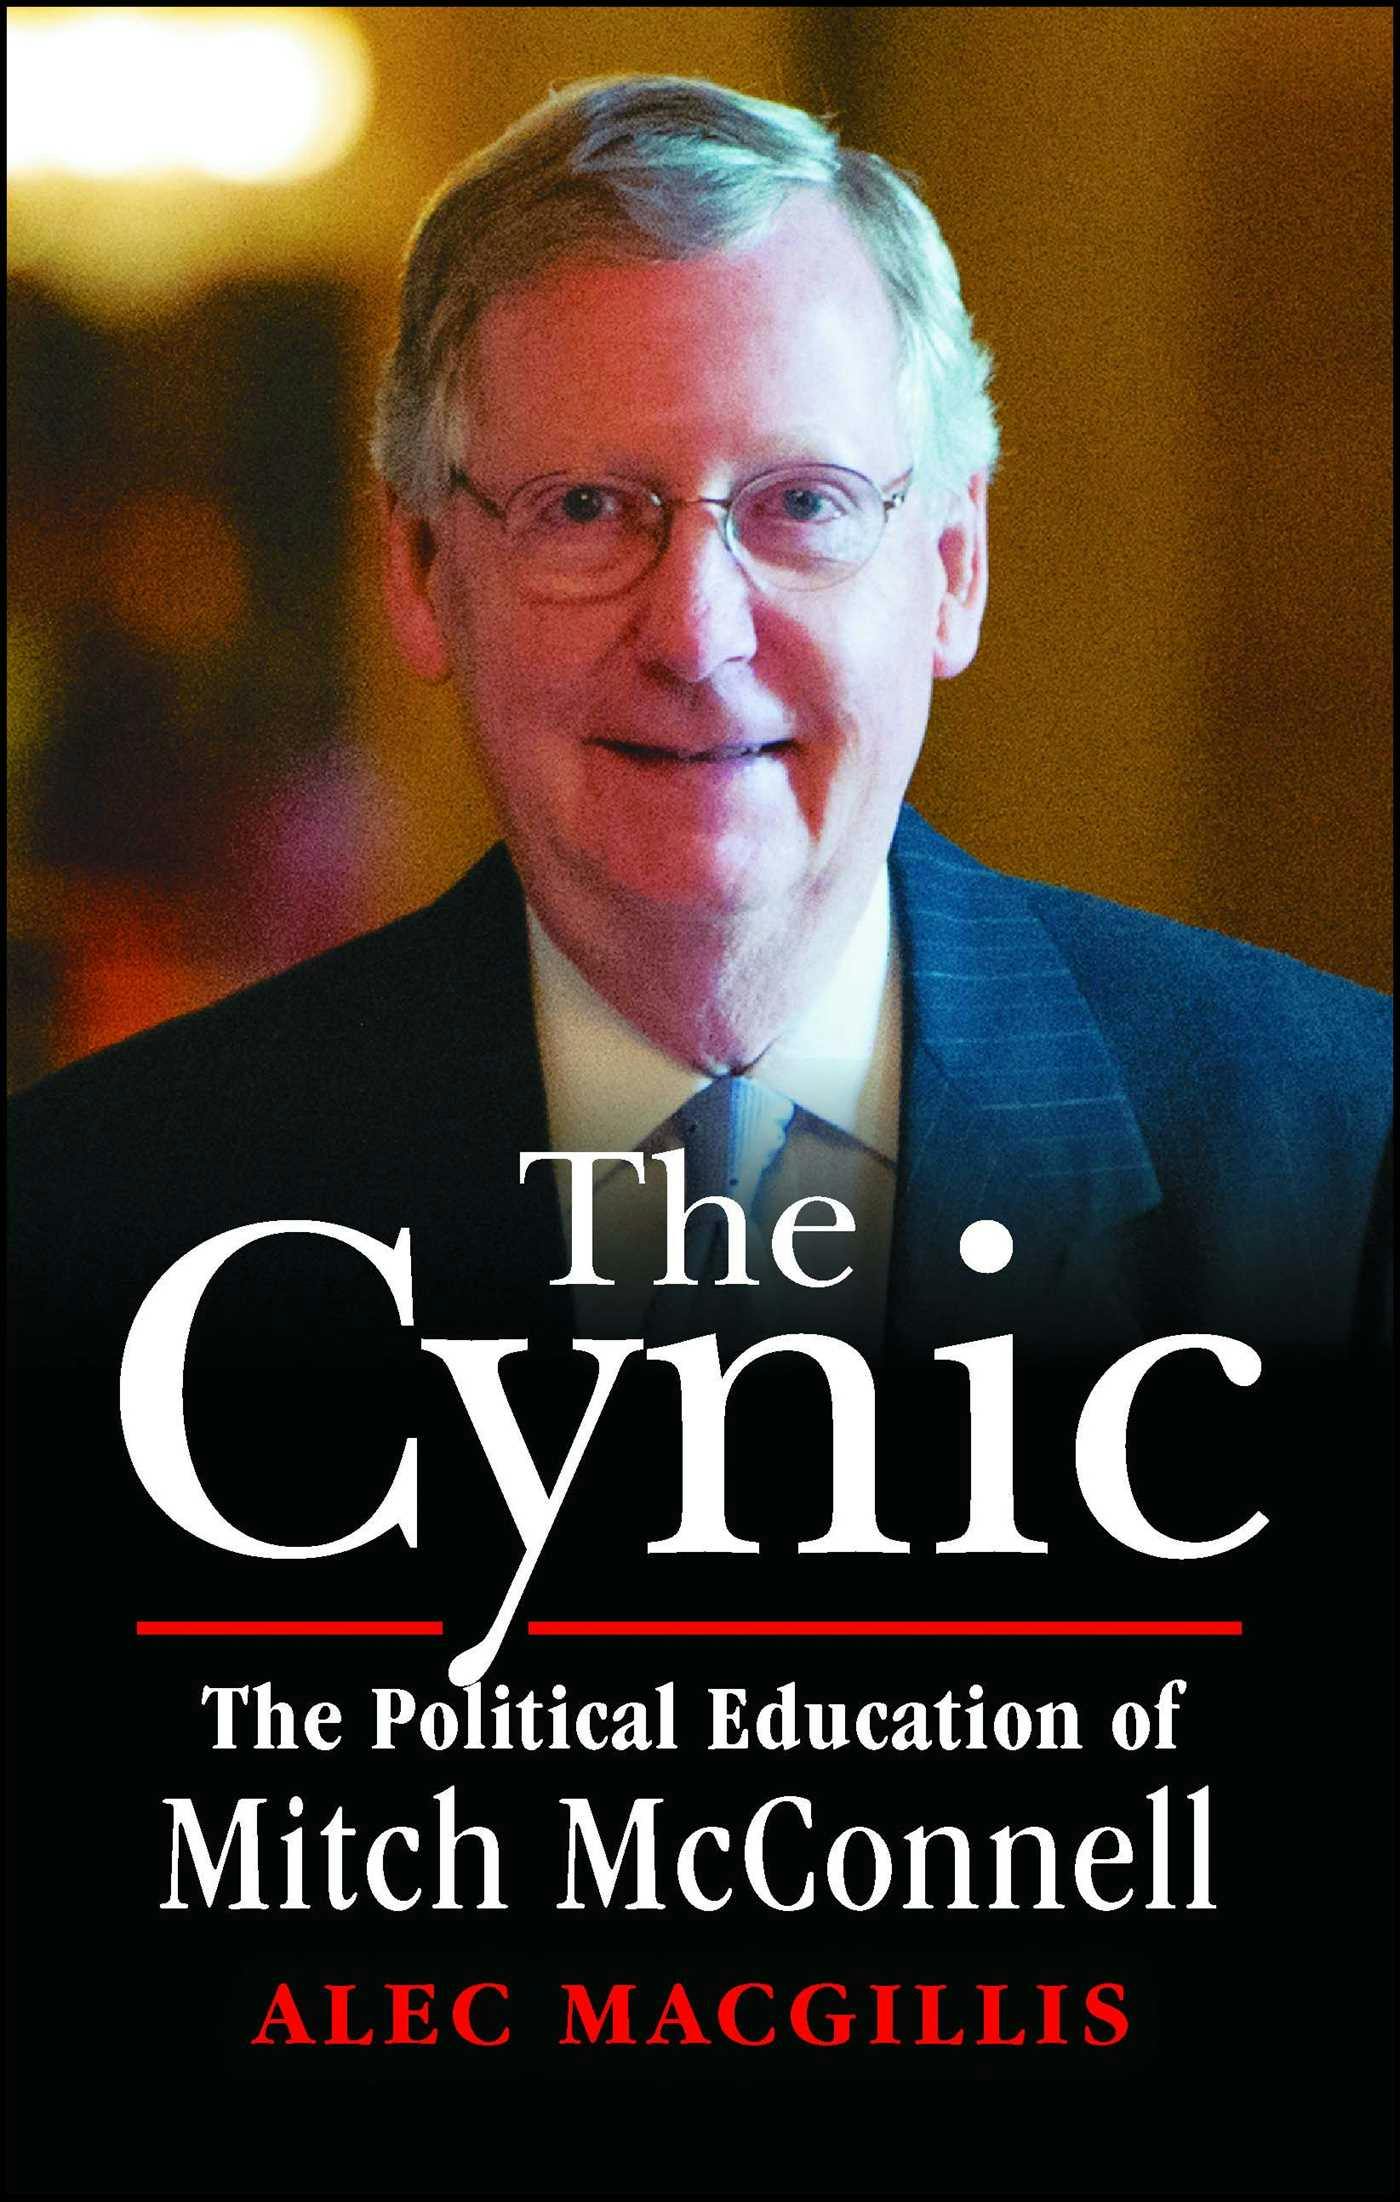 The Cynic: The Political Education of Mitch McConnell - Alec MacGillis